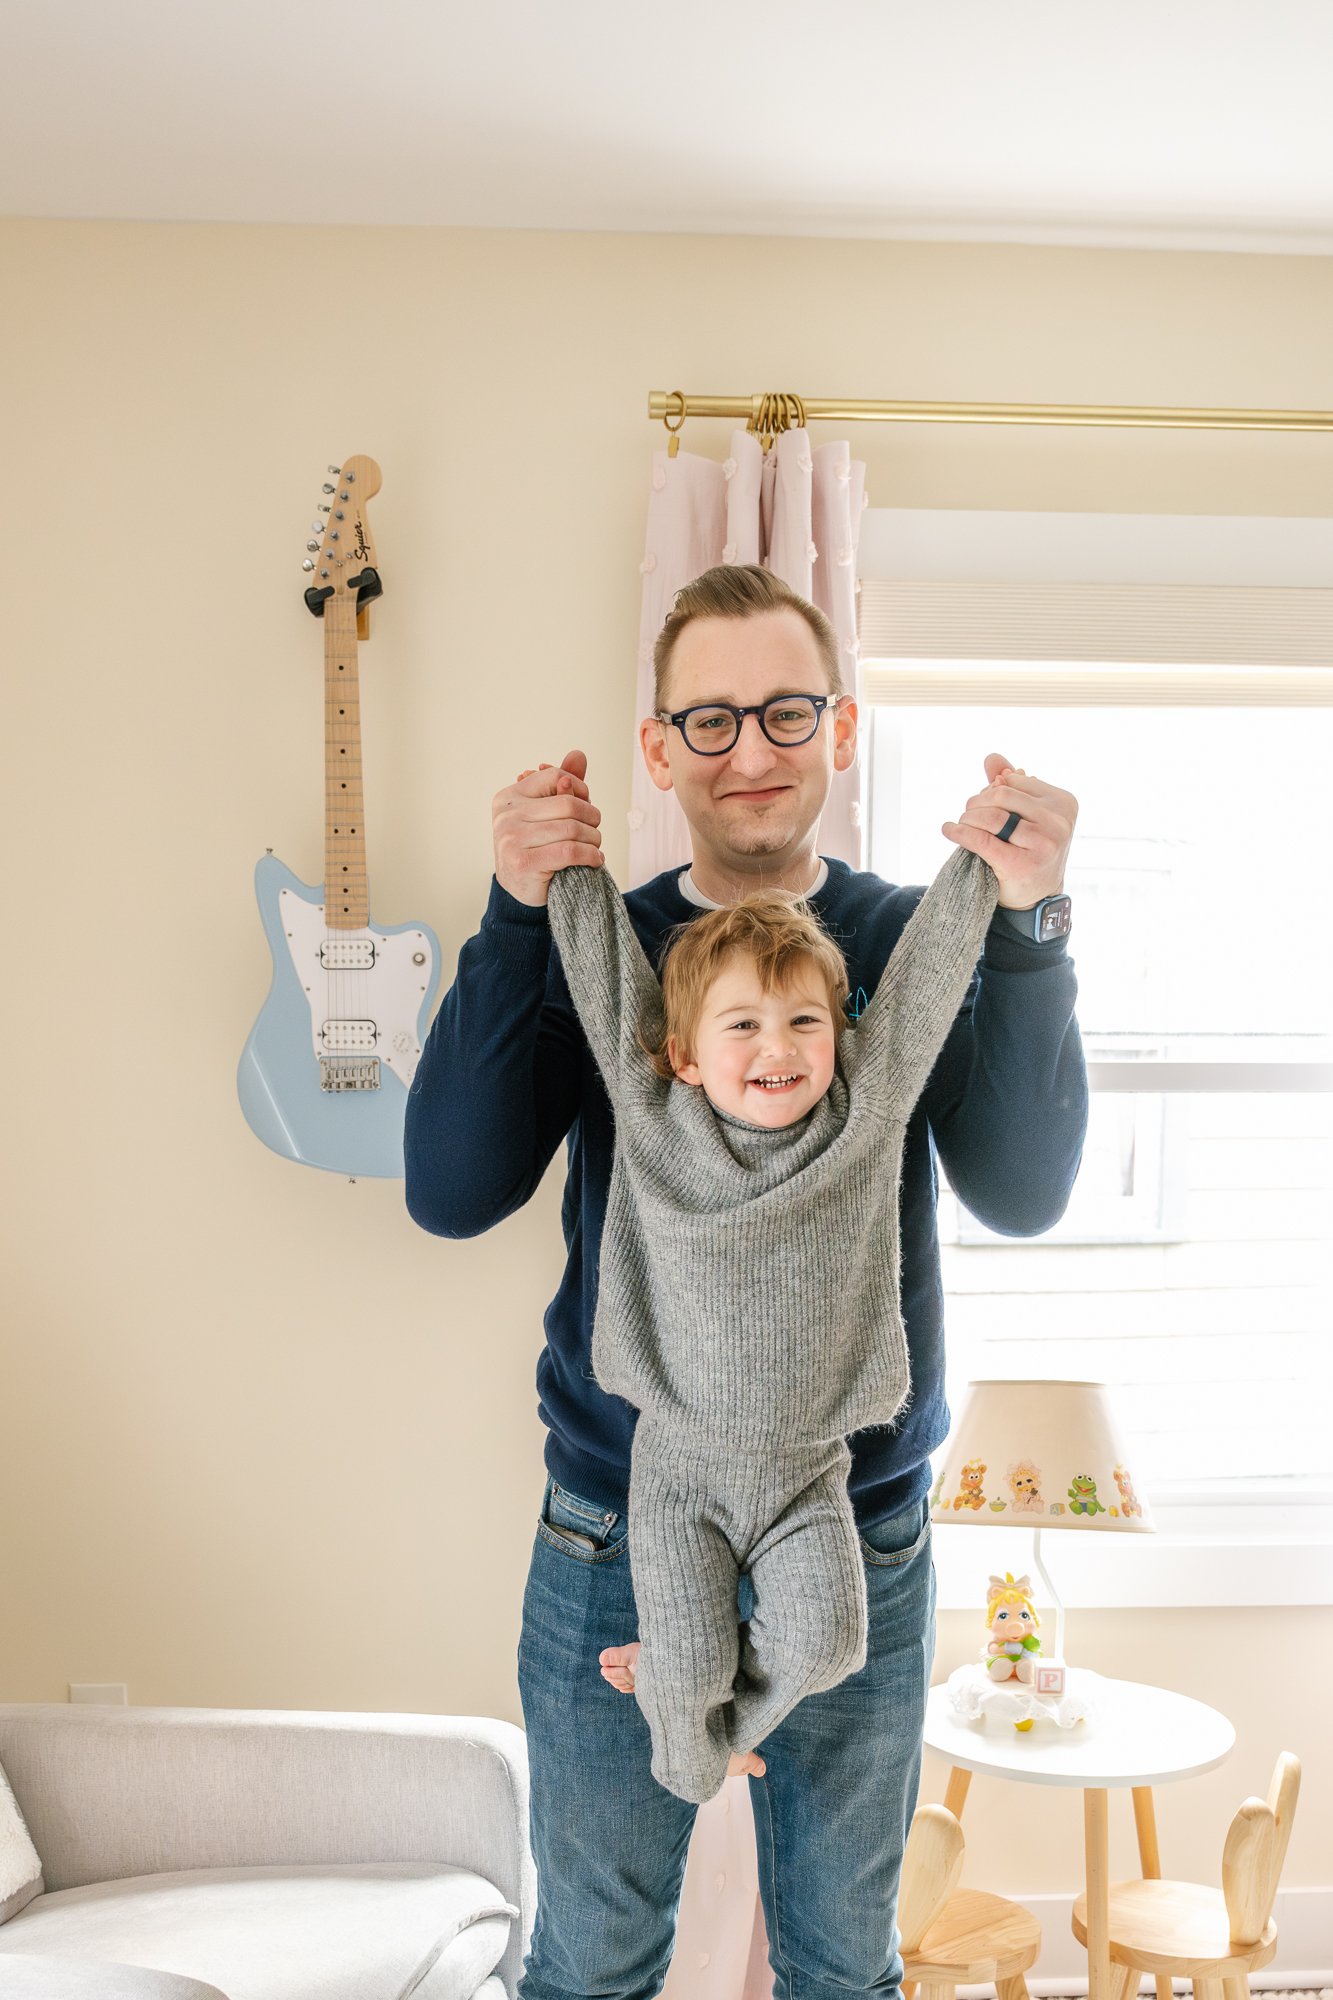   Dad playing with son during casual family photos at home. Casual family portrait poses family photo inspiration father son pose inspiration #UnionCountyFamilyPhotographer #PassaicCountyFamilyPhotographer #NorthernNewJerseyFamilyPhotographer #Northe